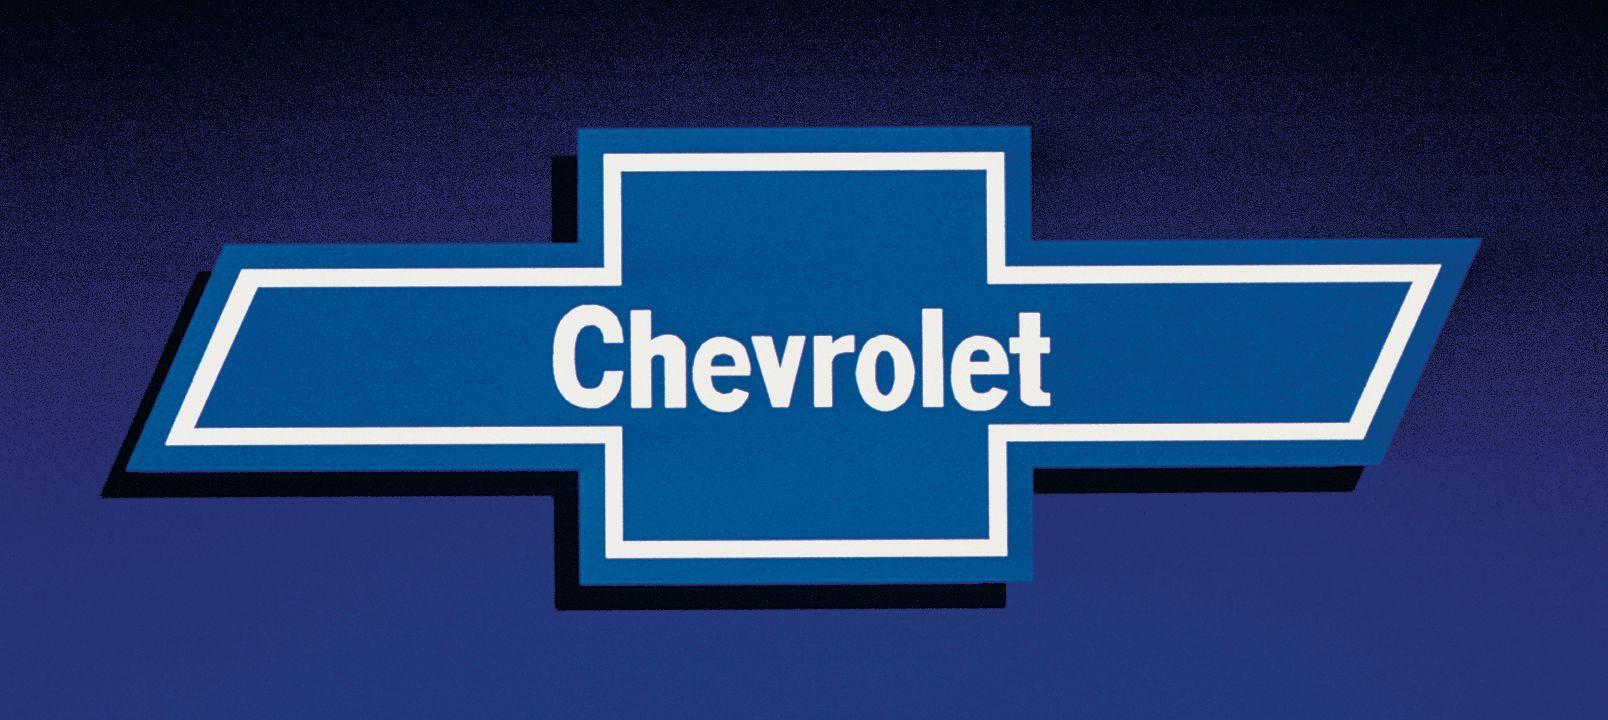 Blue Chevy Logo - Chevrolet Pressroom - United States - Images